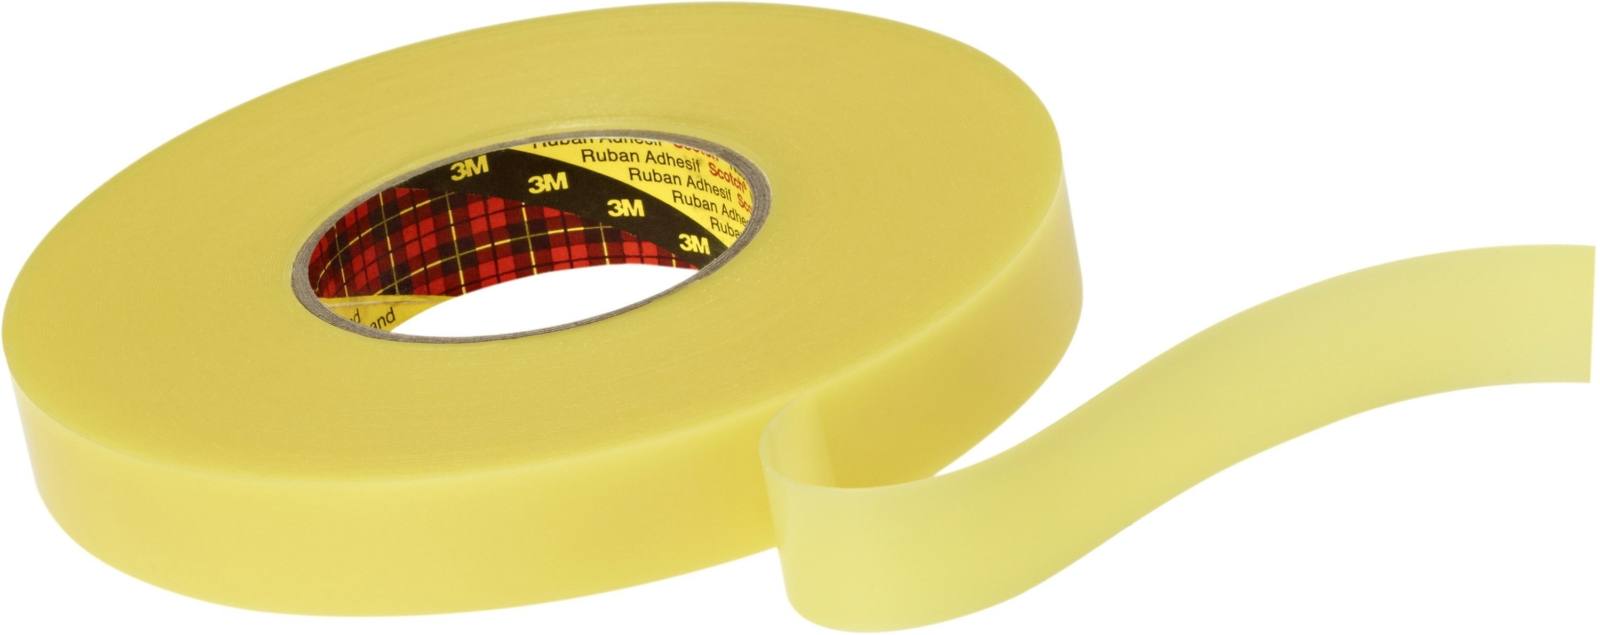 3M Double-sided removable adhesive tape 4656F, yellow, 15 mm x 33 m, 0.6 mm